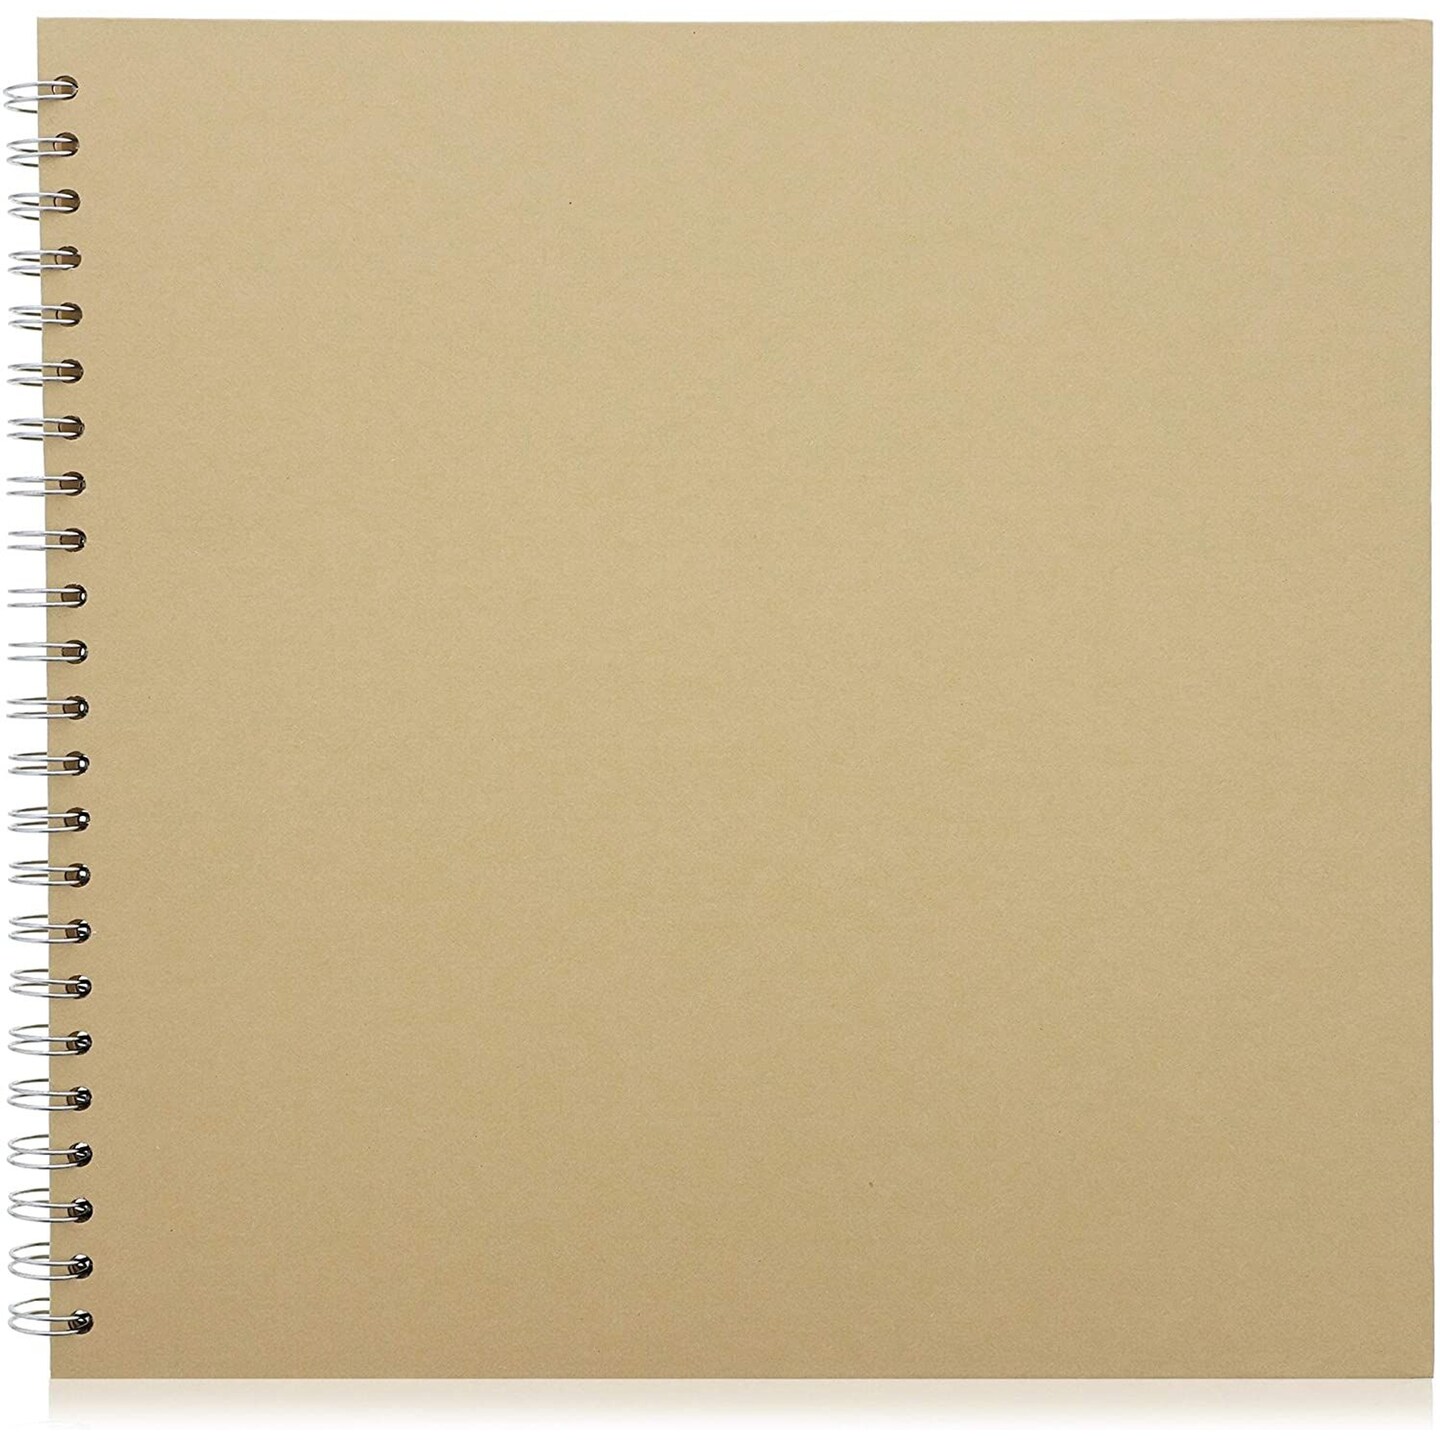 80 Pages Hardcover Kraft Scrapbook Albums Blank Journal for